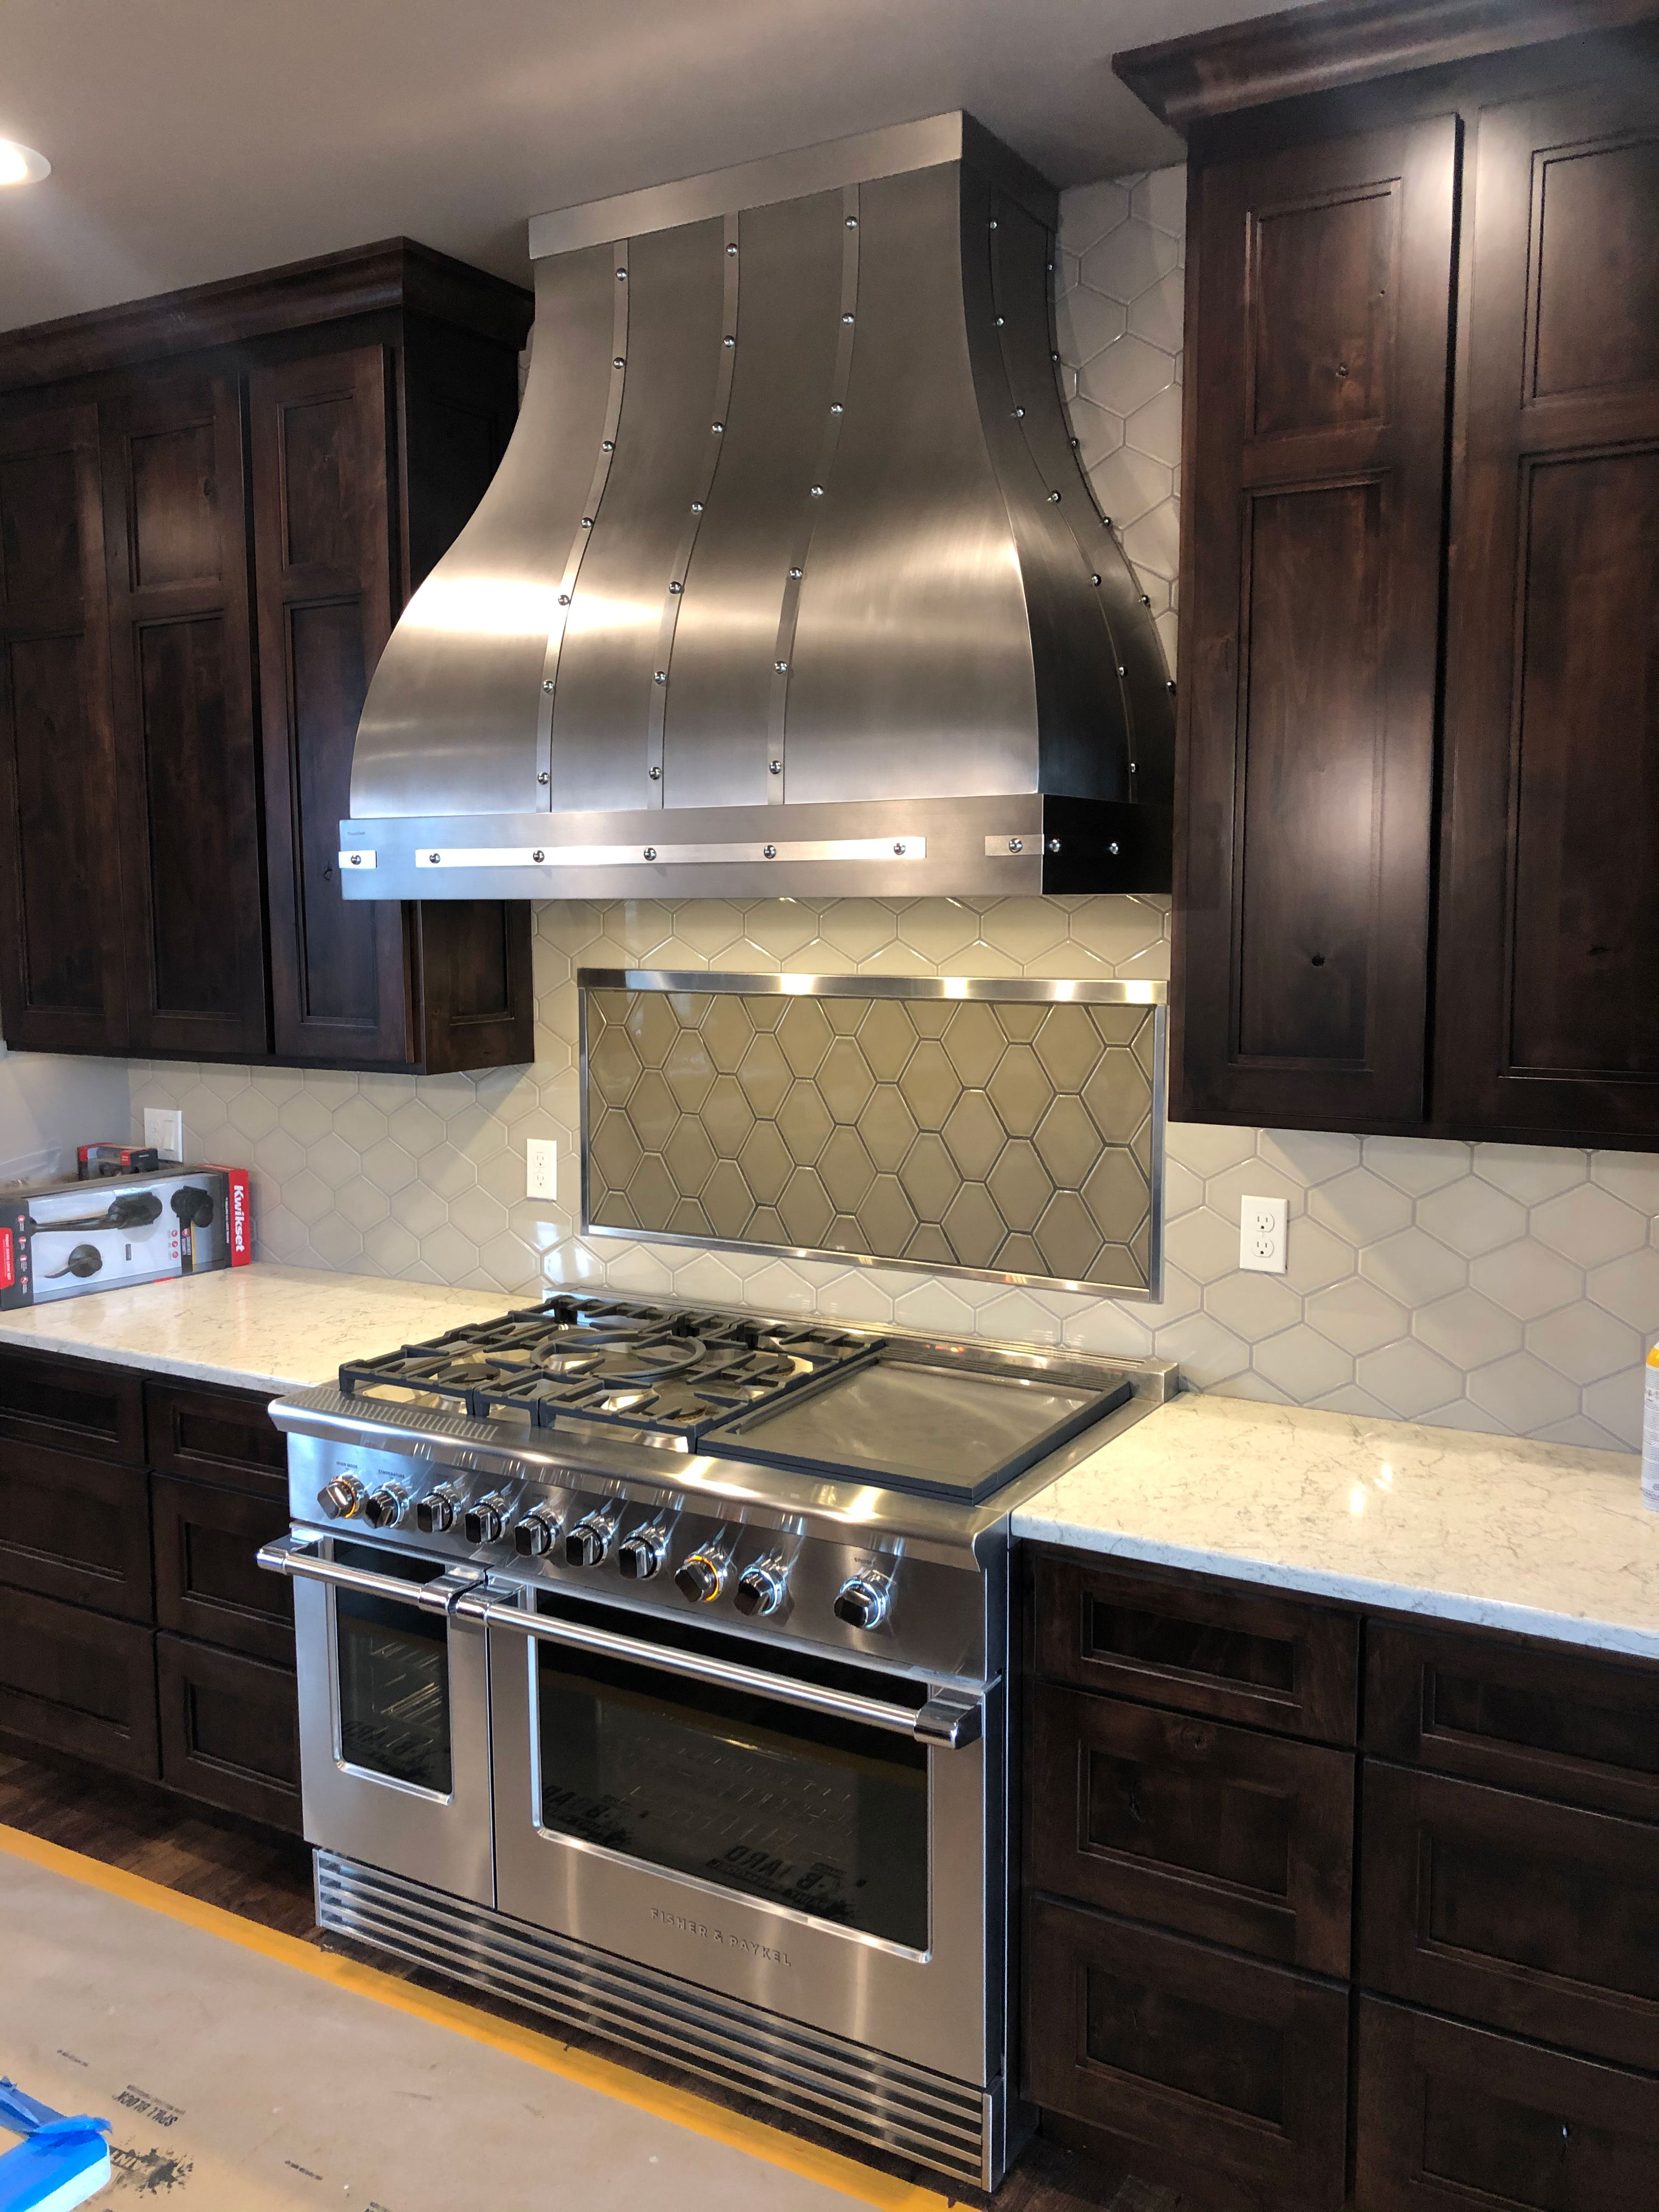 The trendy kitchen design idea is to incorporate a french-inspired theme with, range-hood-idea, complemented by luxurious marble kitchen countertops